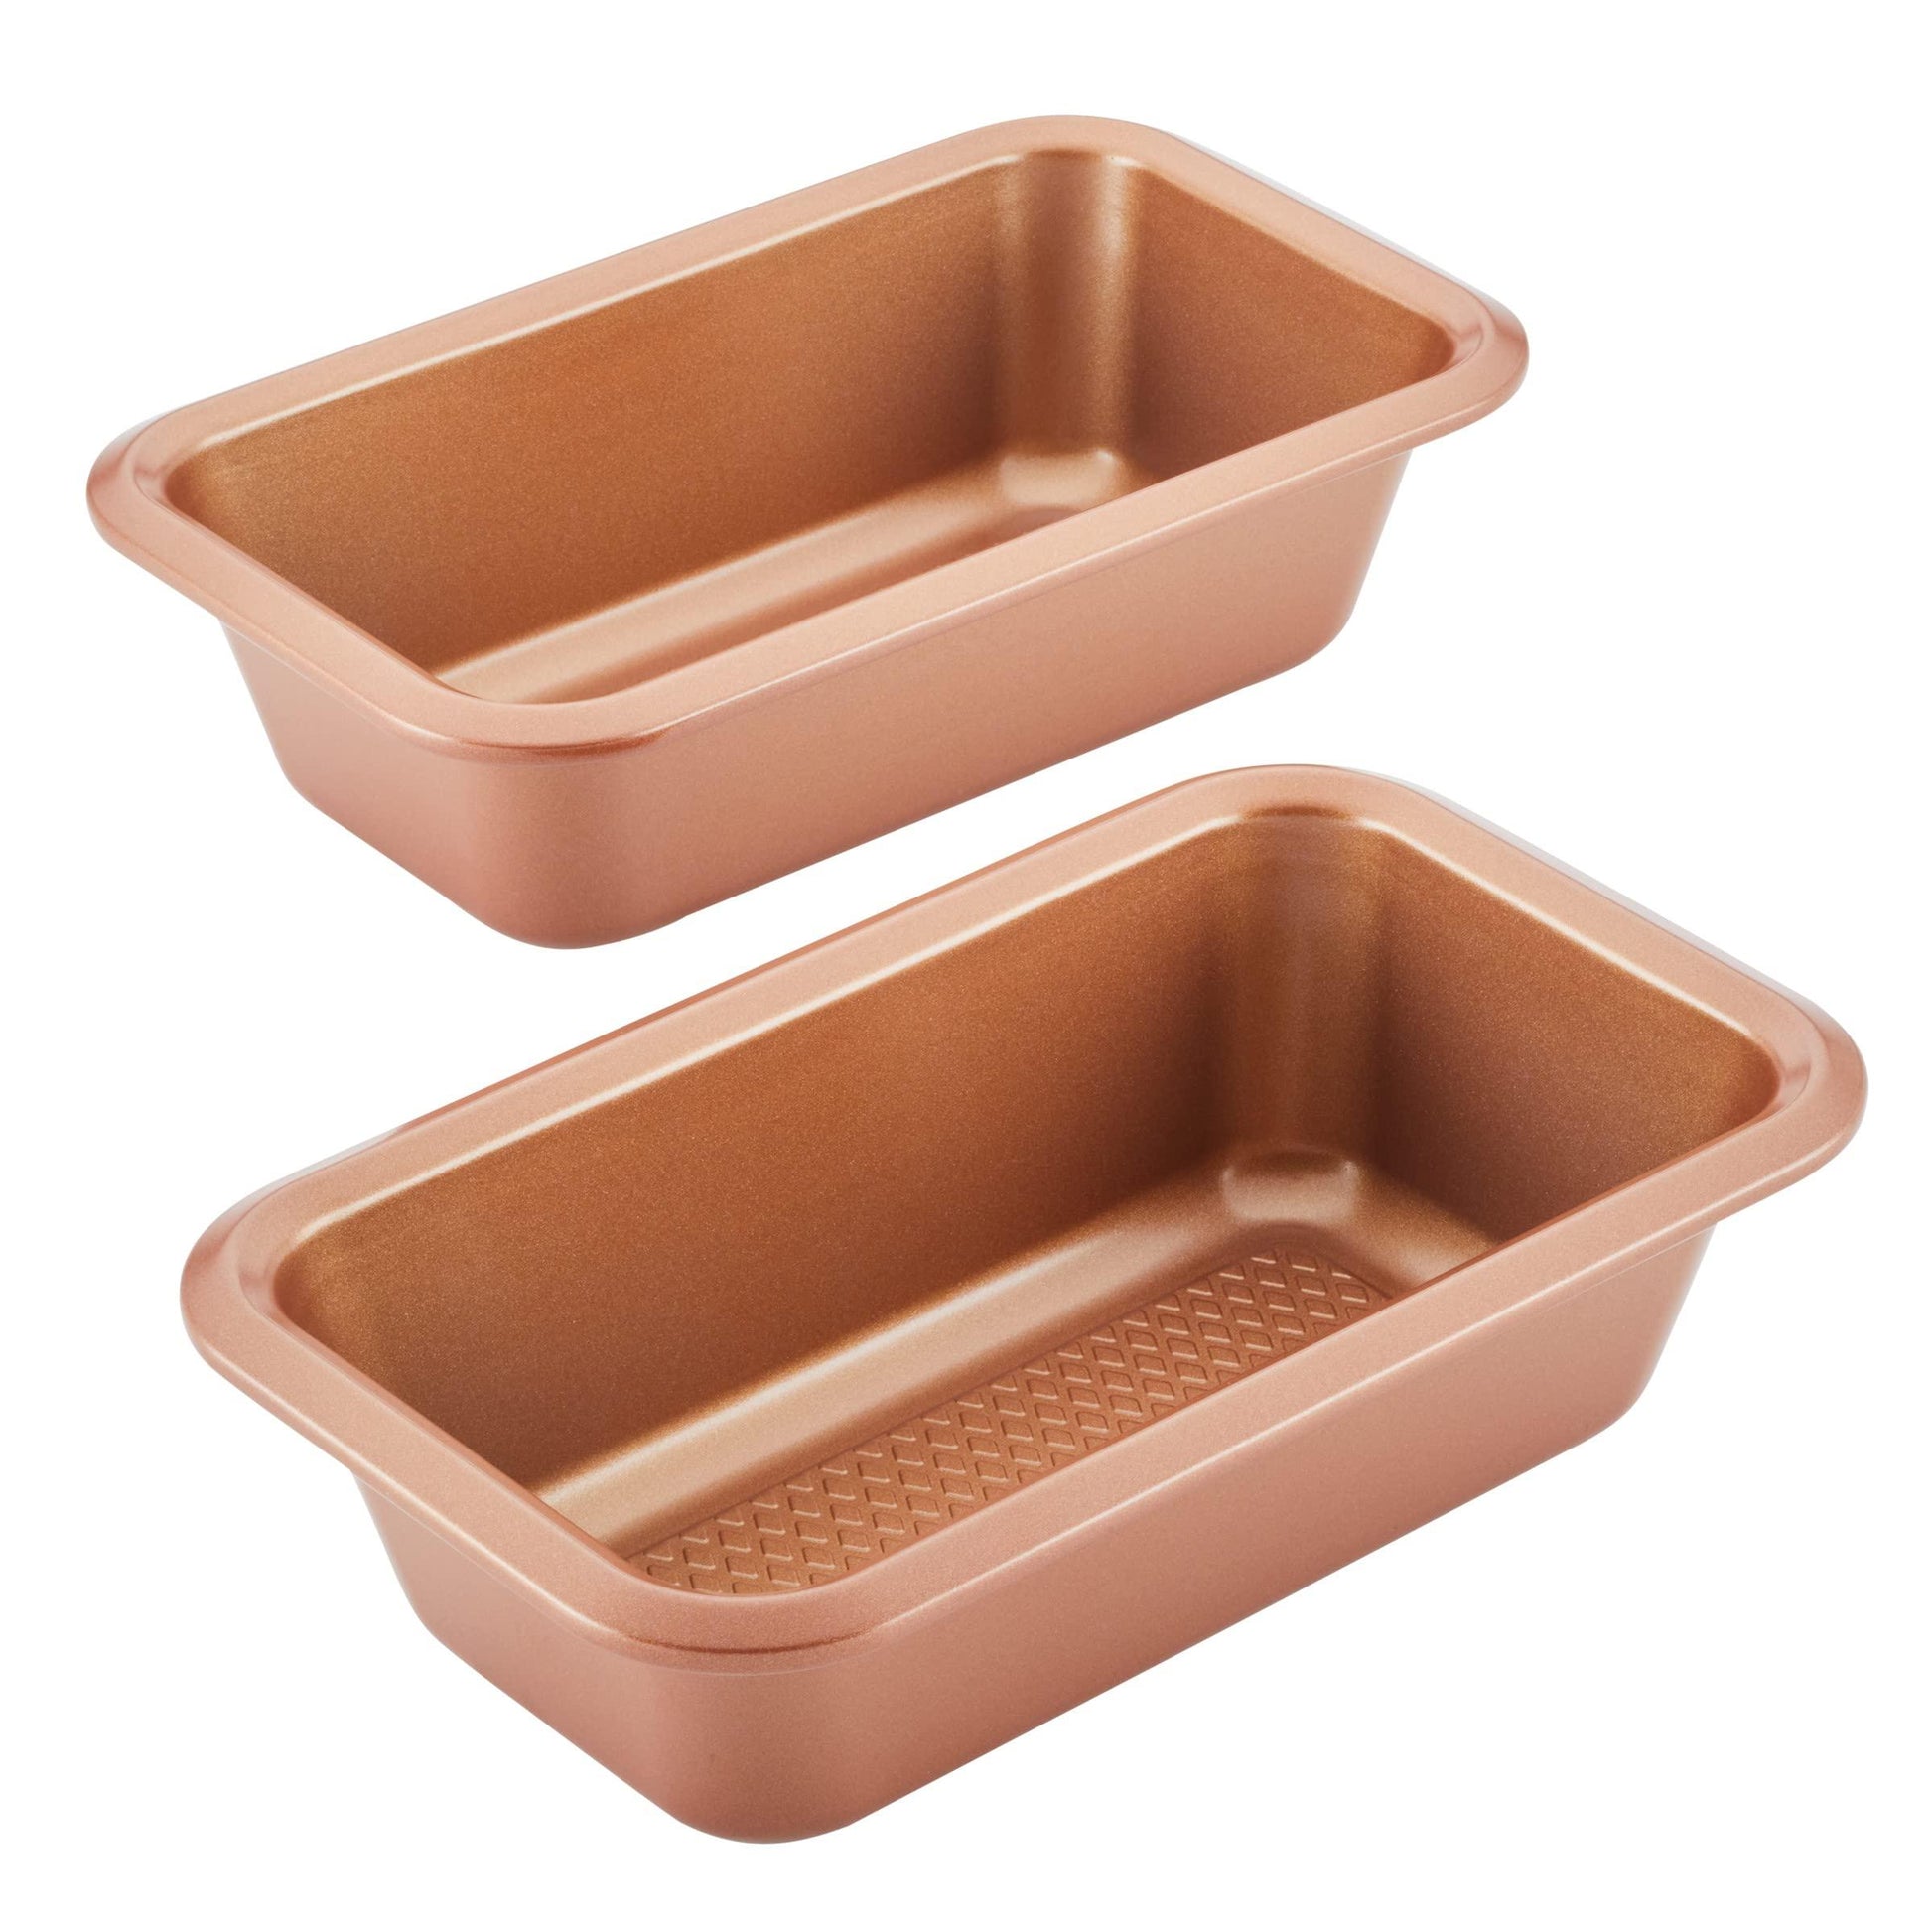 Ayesha Curry Kitchenware Bakeware Nonstick Meatloaf/Loaf Pan Set, Two 9 Inch x 5 Inch, Copper - CookCave